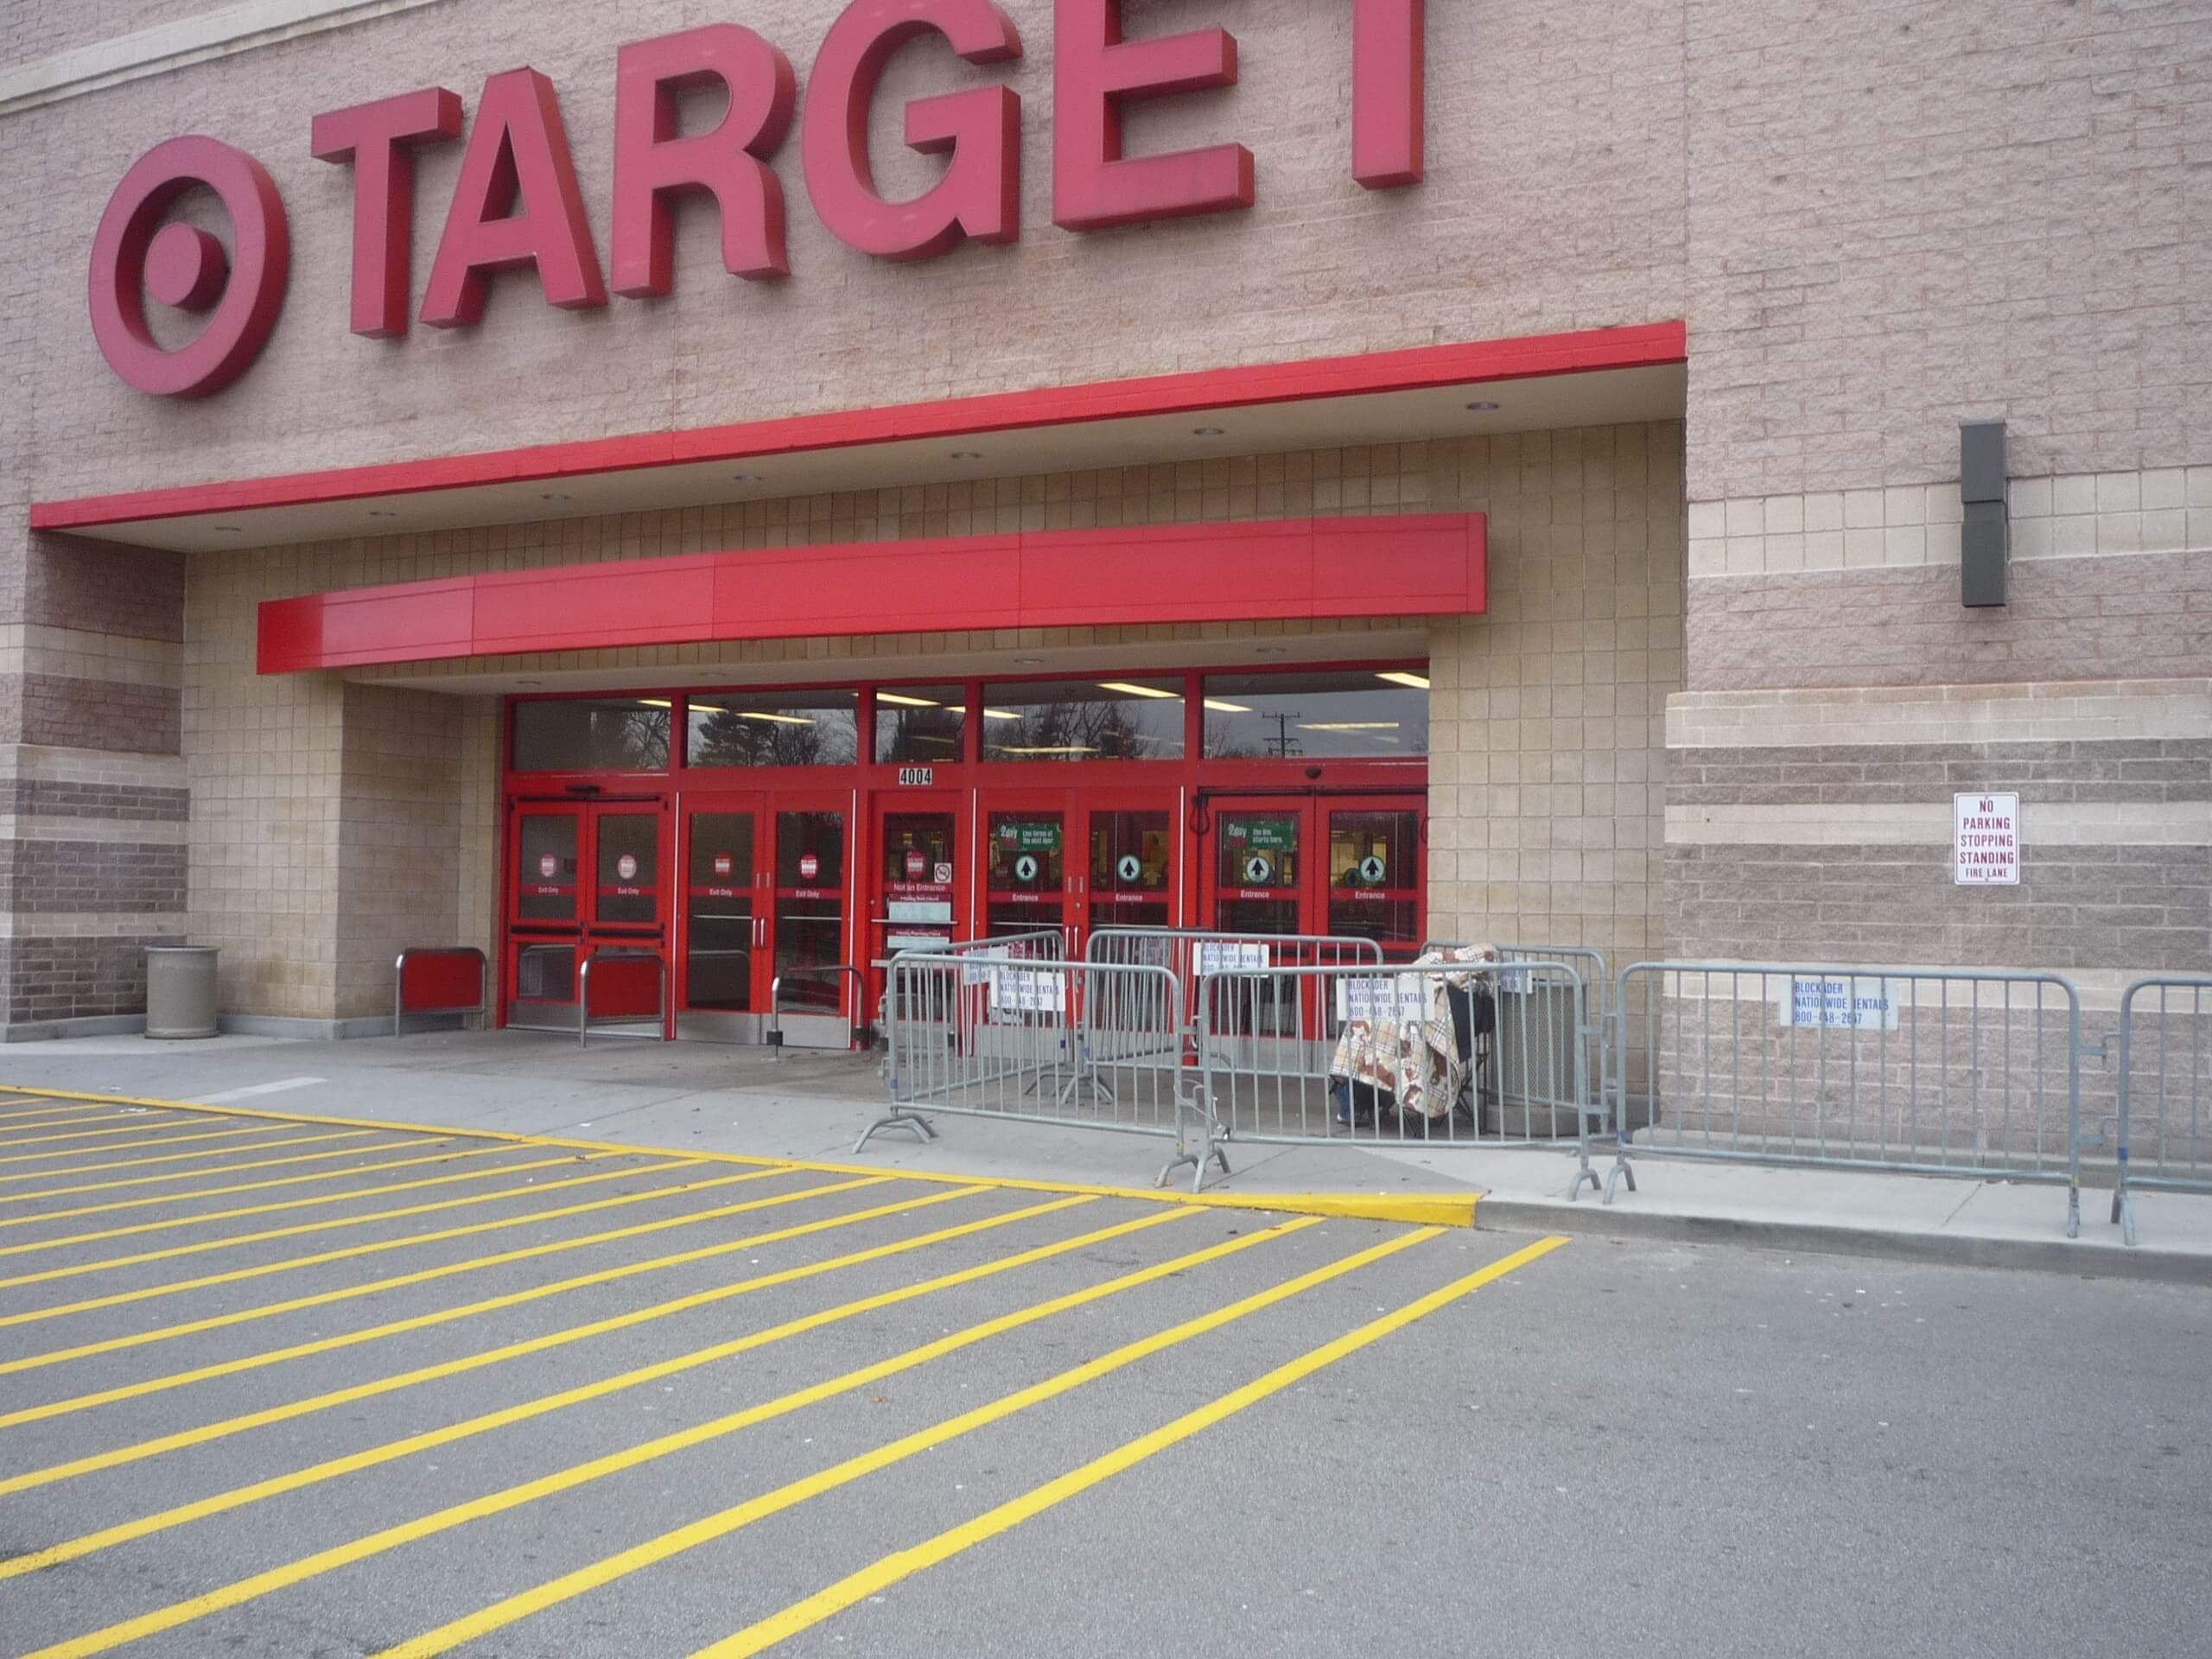 A Target Store with steel barriers